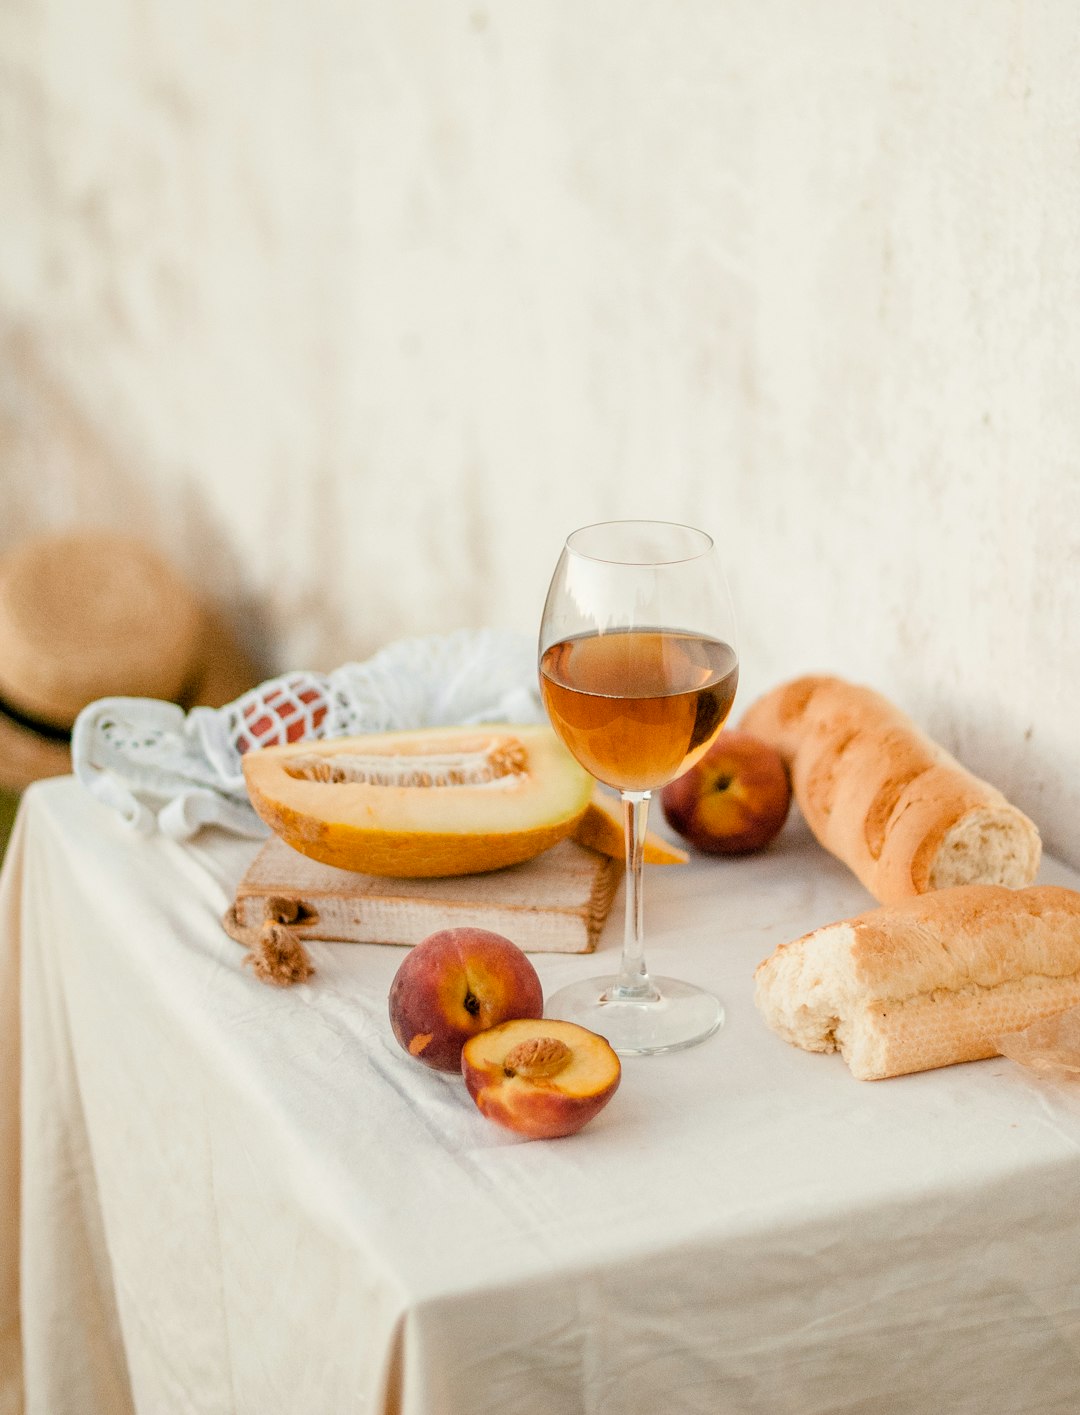 bread and wine glass on table